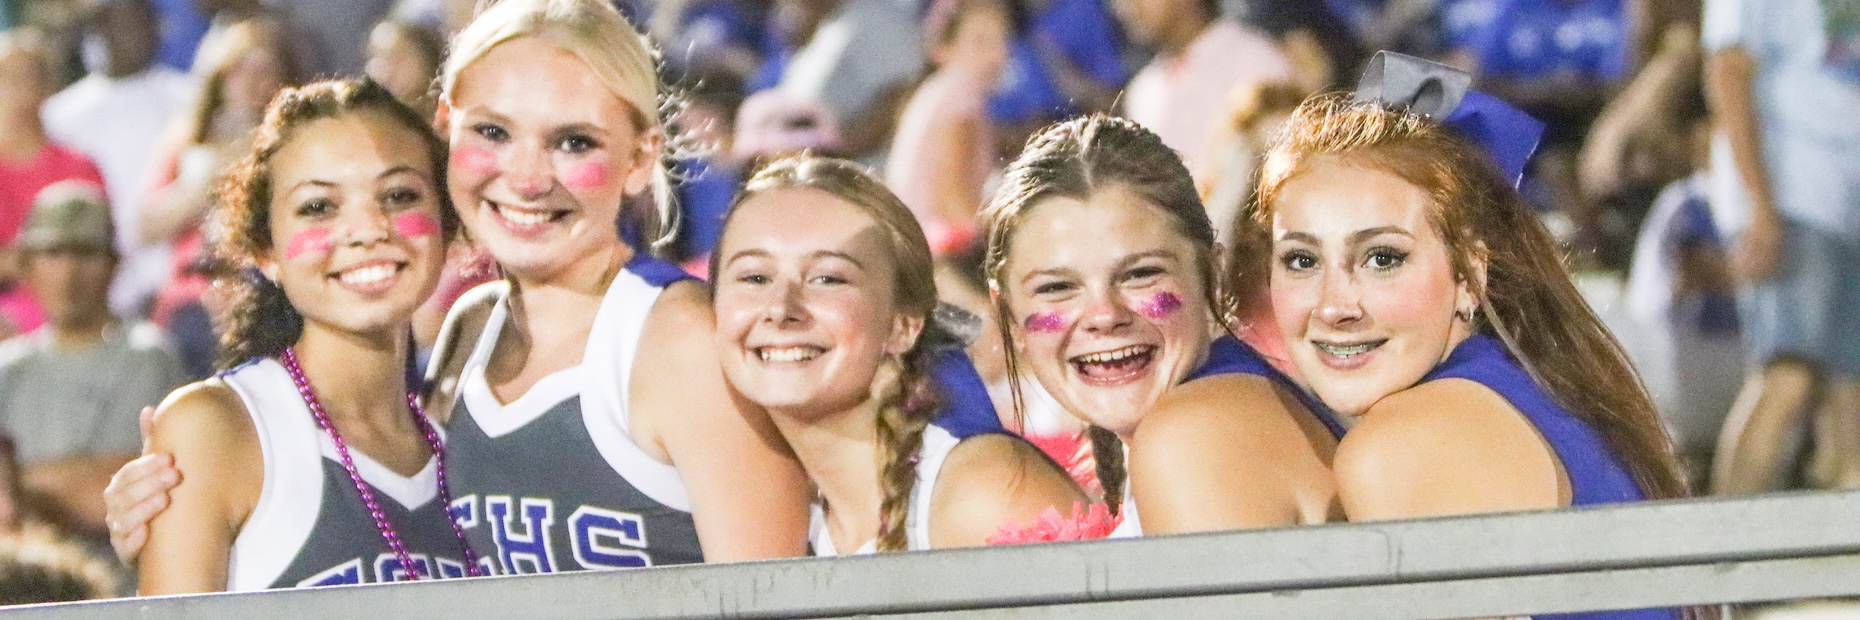 Cheerleaders pose for photo at football game